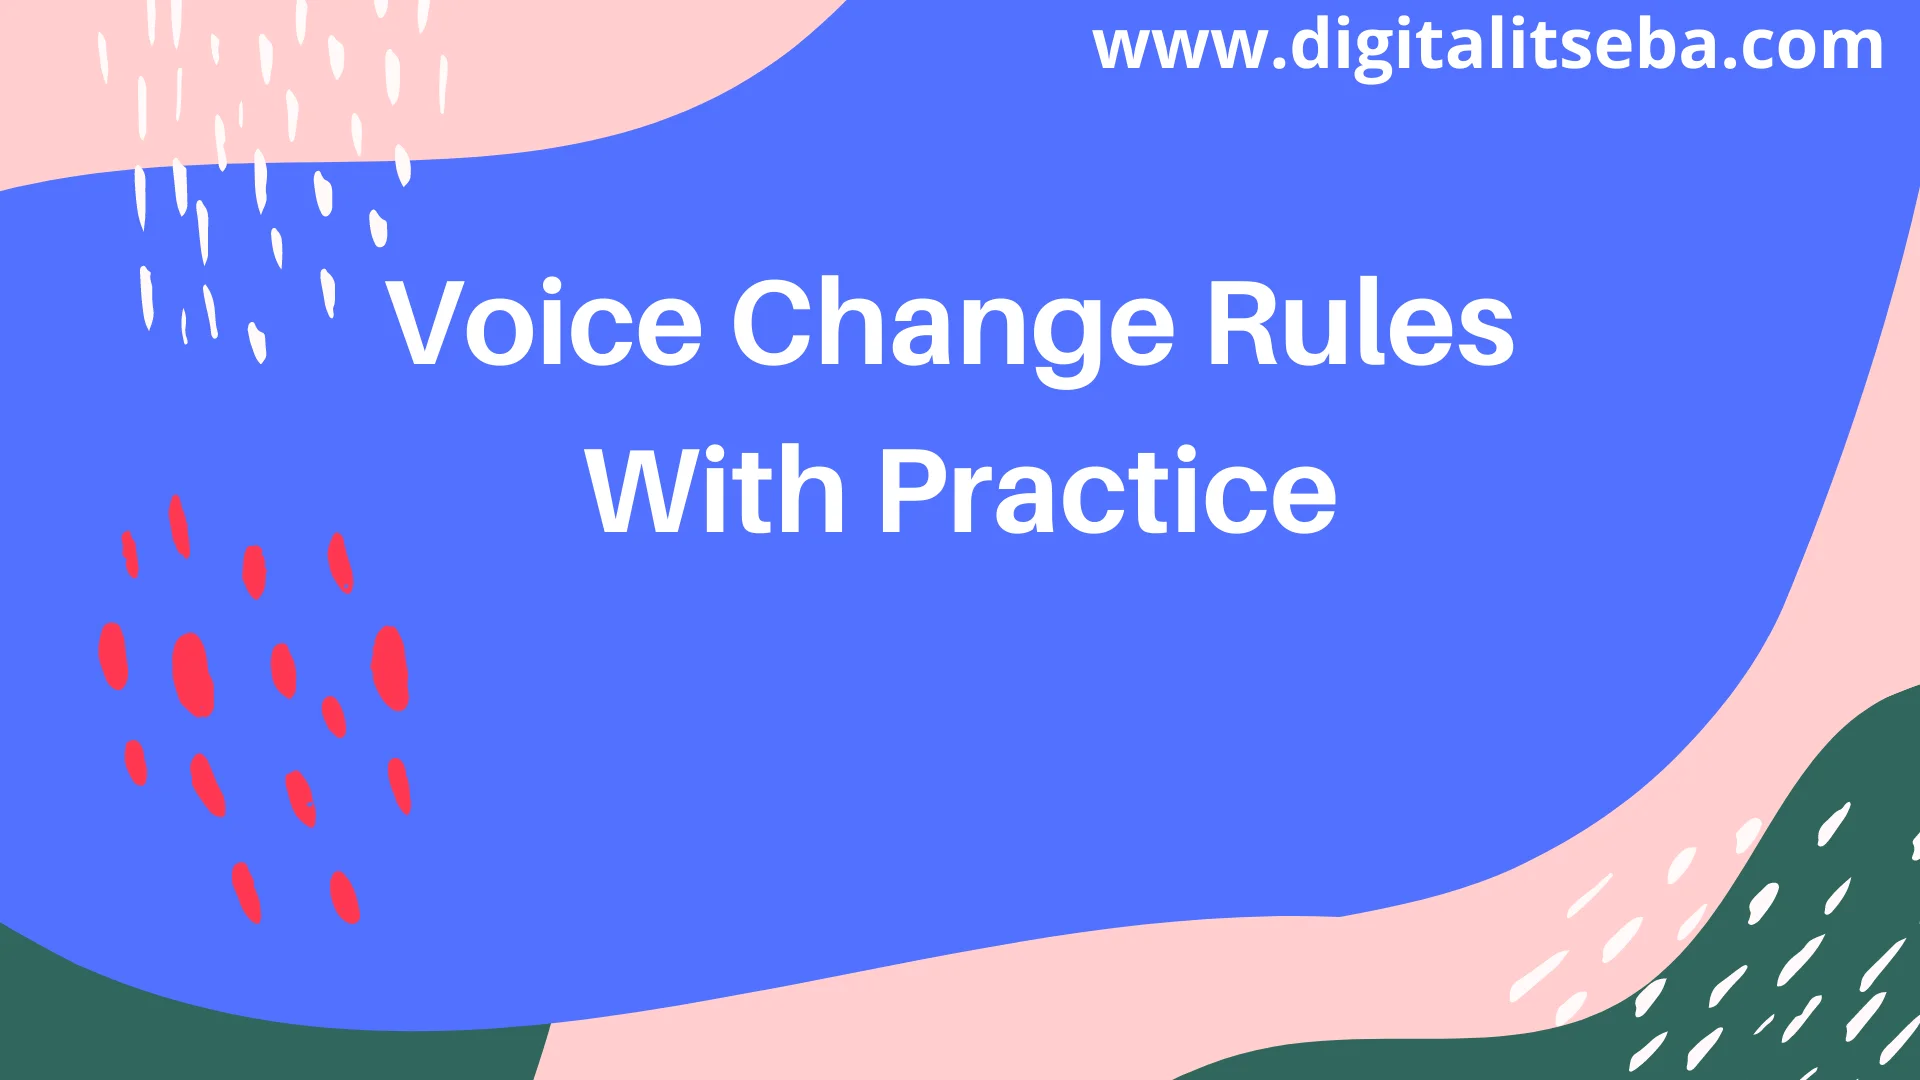 Voice Change Rules